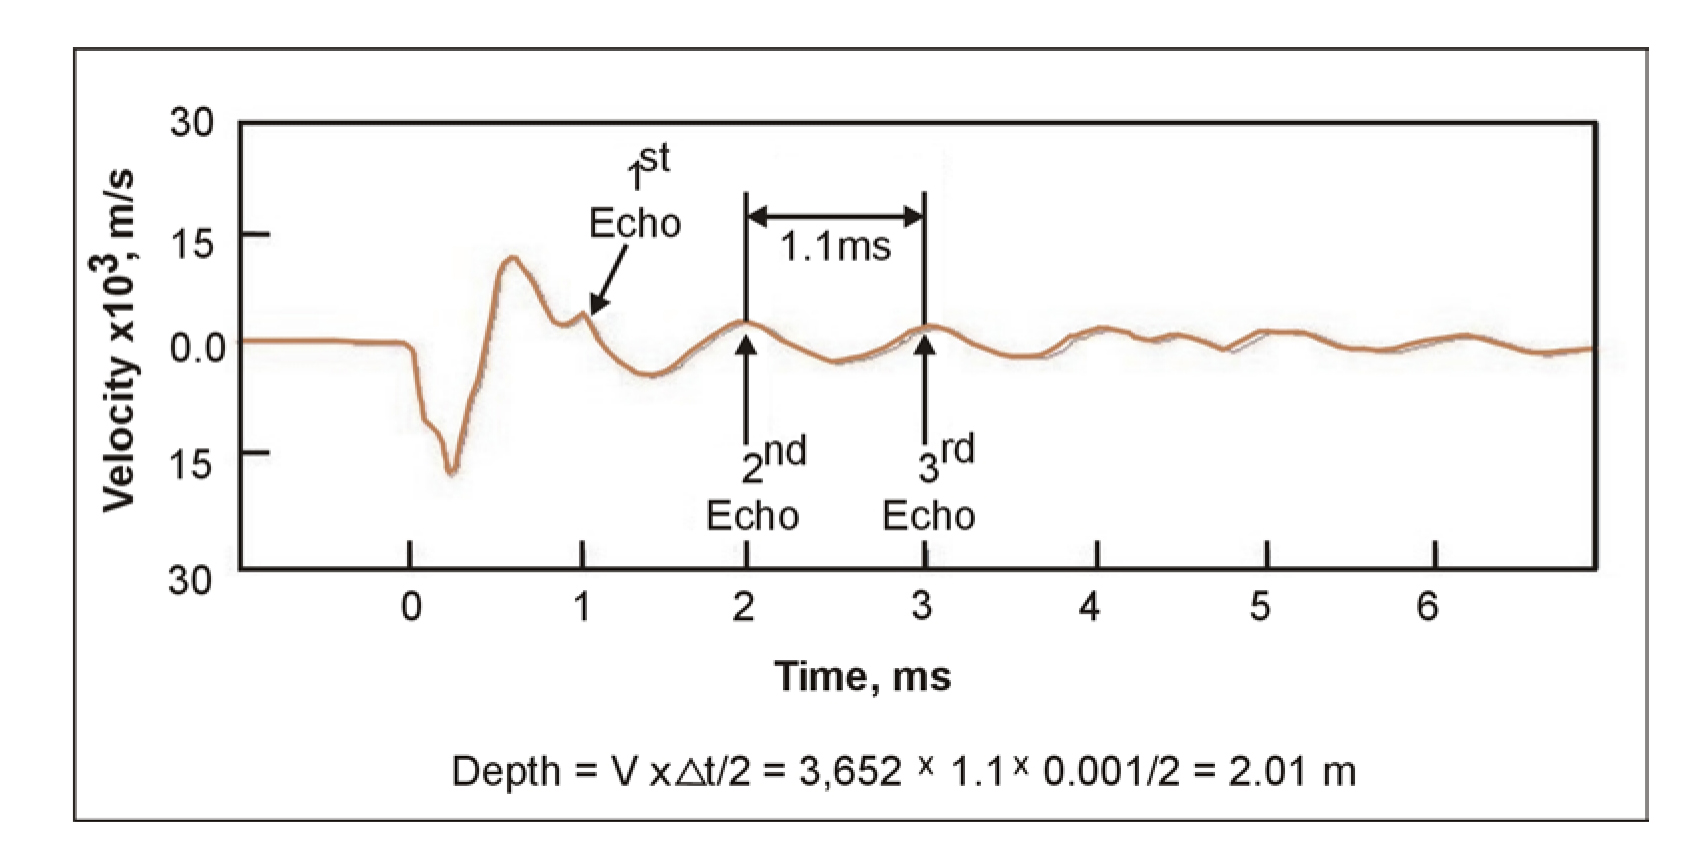 Sonic Echo record and depth calculation.